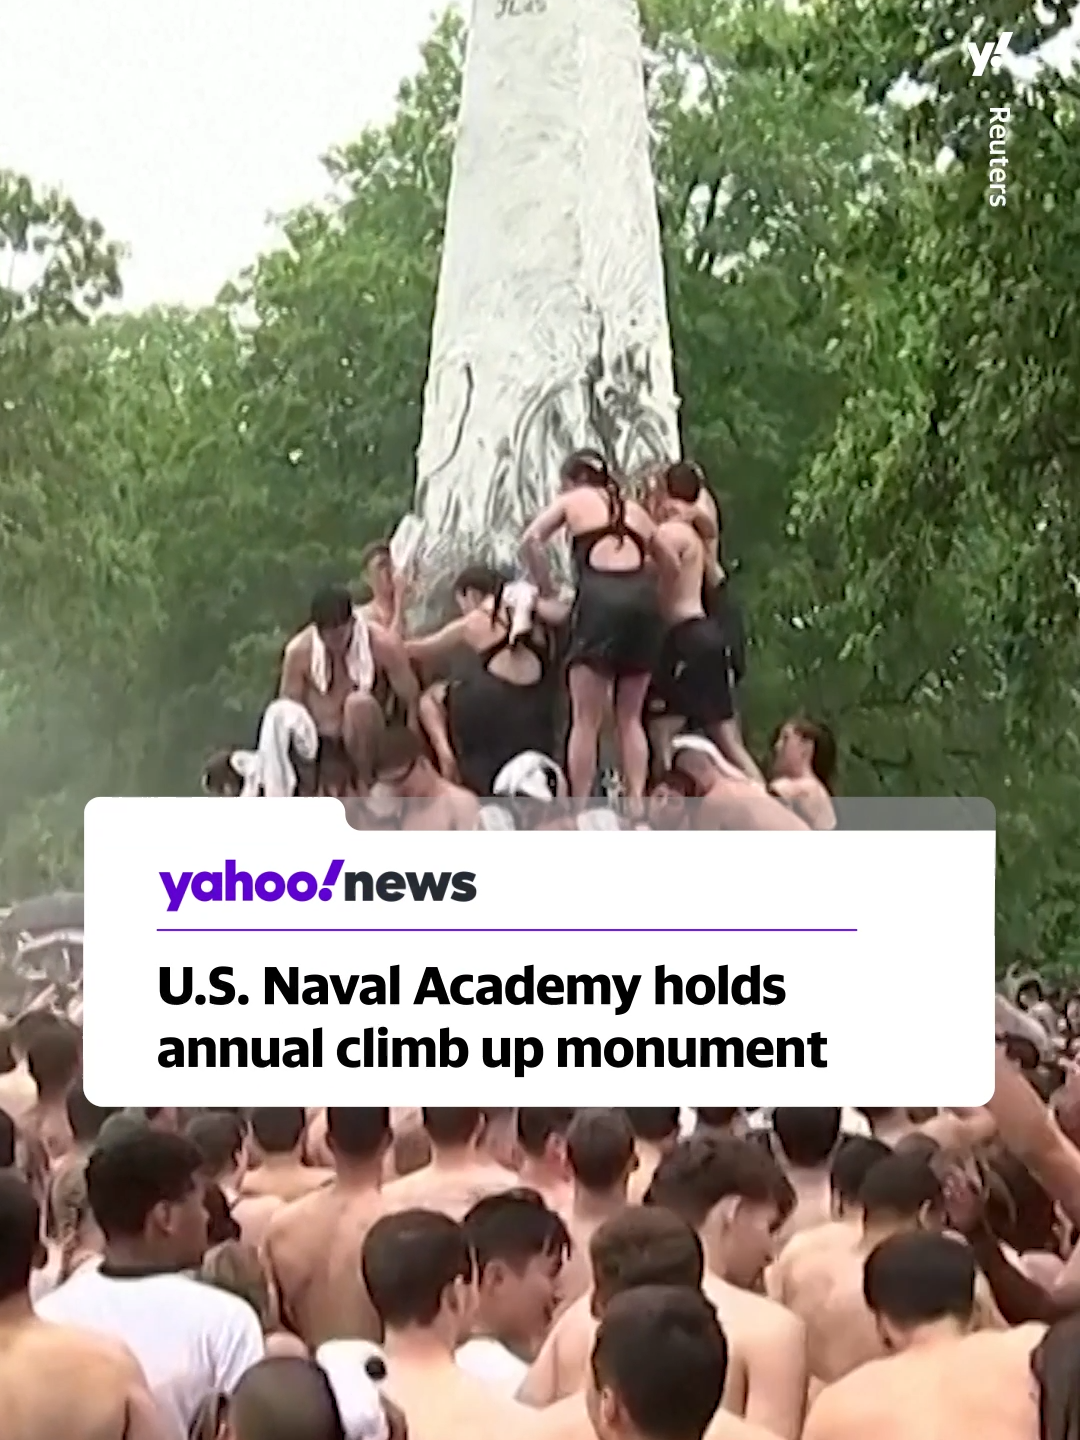 Members of the U.S. Naval Academy's freshman class worked together to climb a greased, 21-foot monument to mark the completion of their first year. The climb ended with 20-year-old Ben Leisegang placing an upperclassman's cap atop the slippery obelisk. #usnavy #navalacademy #news #yahoonews